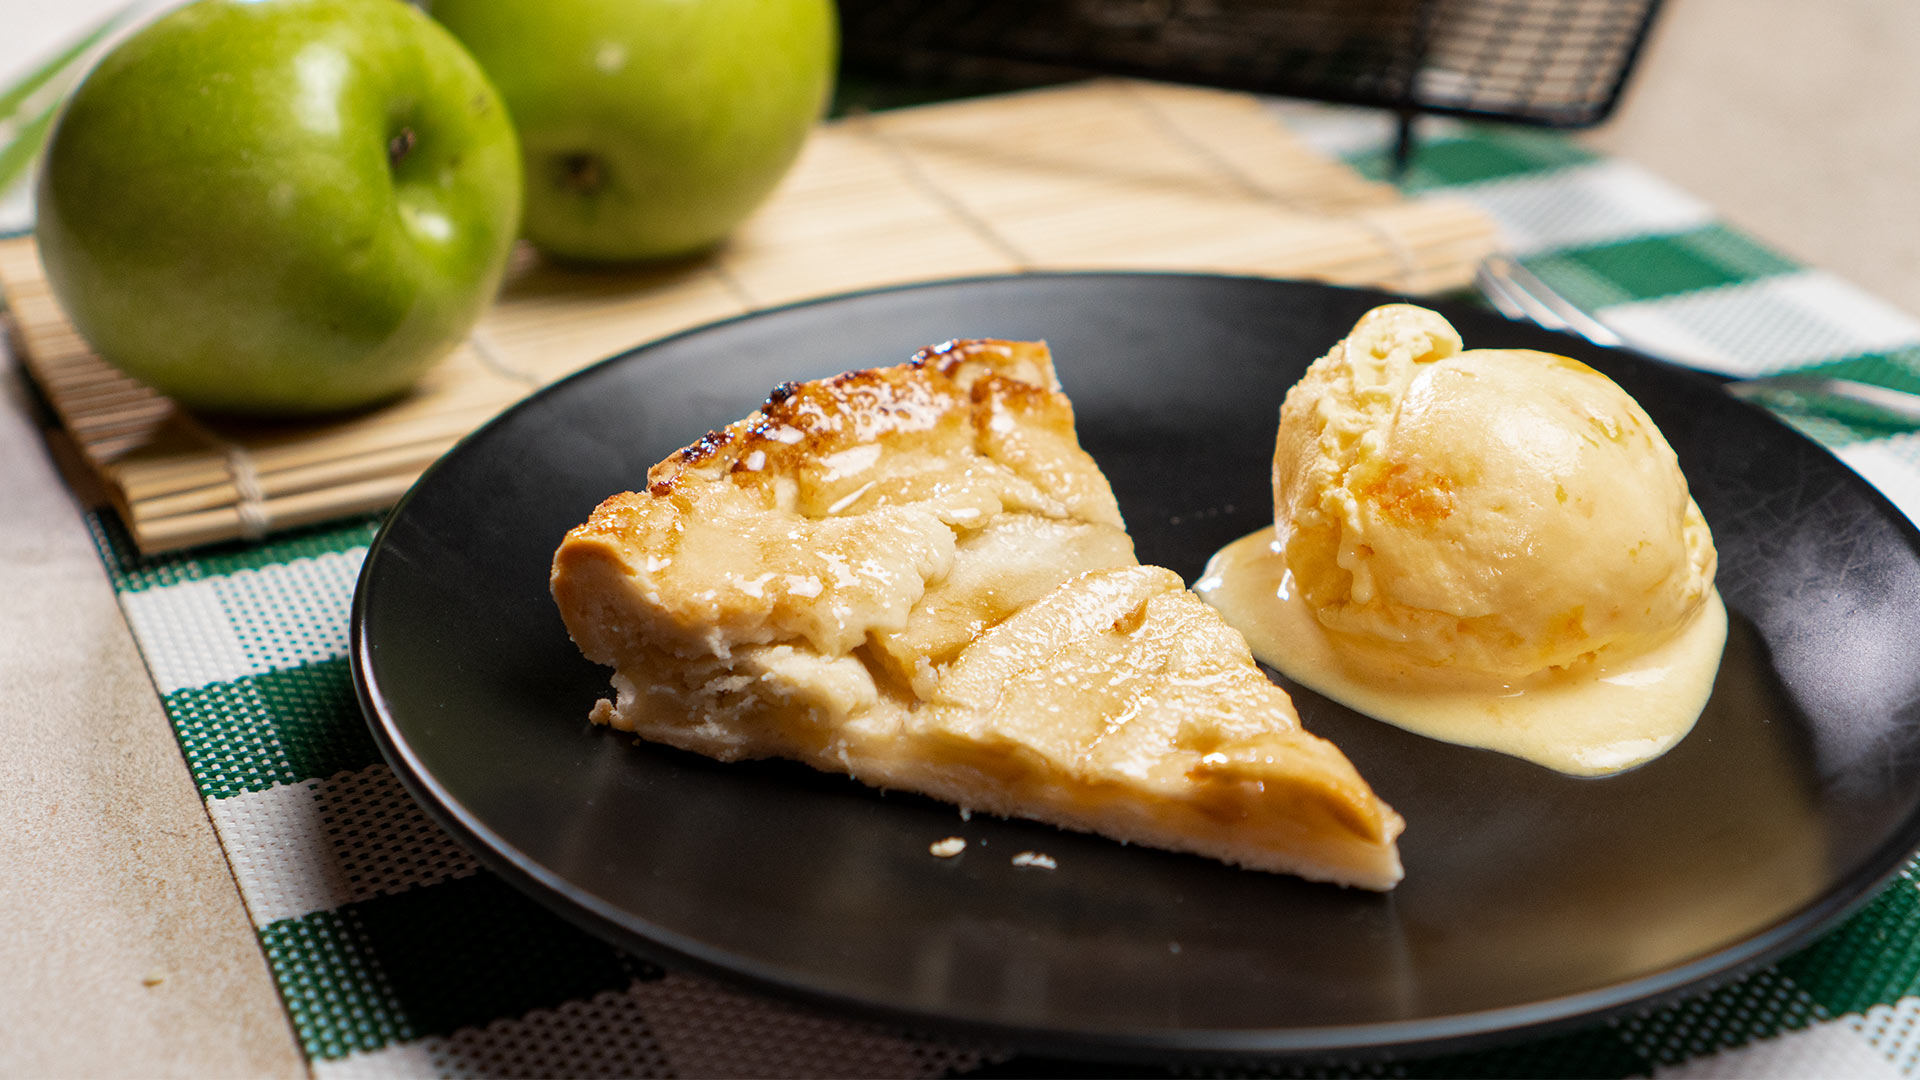 The Trick to Making Granny Smith Apples Less Tart